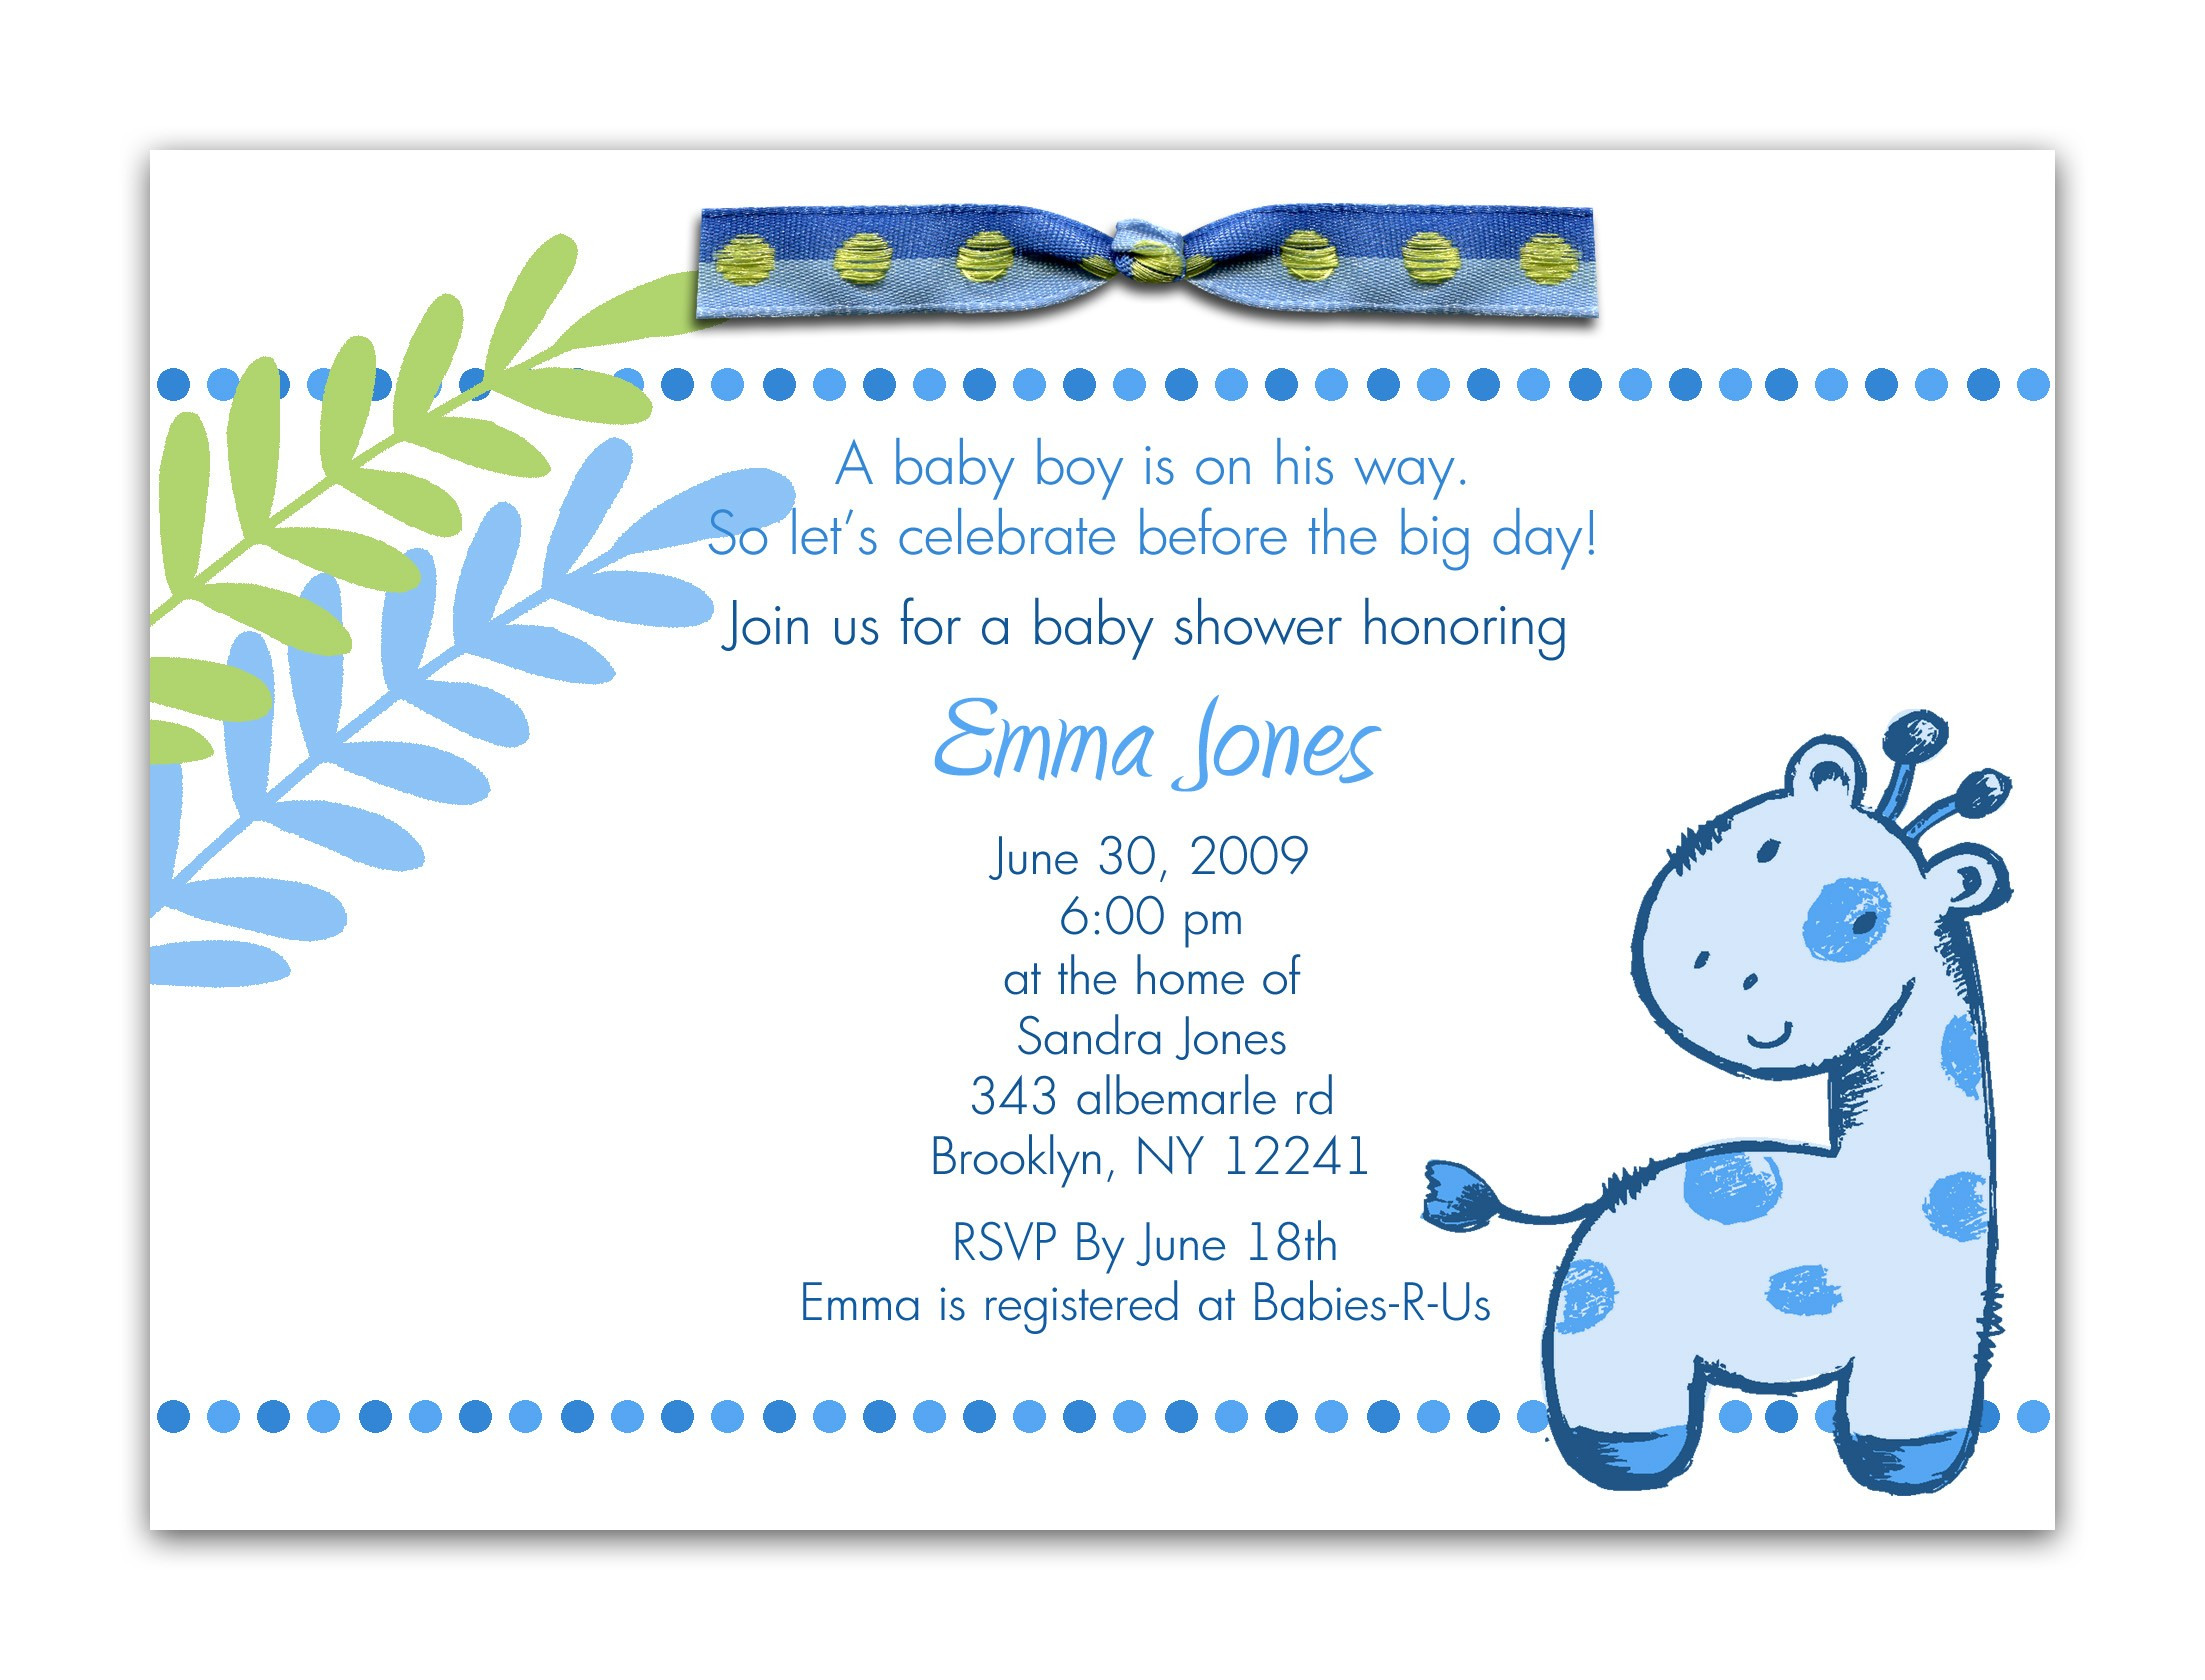 Full Size of Baby Shower:delightful Baby Shower Invitation Wording Picture Designs Baby Shower Invitation Wording Luxury Baby Boy Shower Invitation Wording Baby Shower Ideas